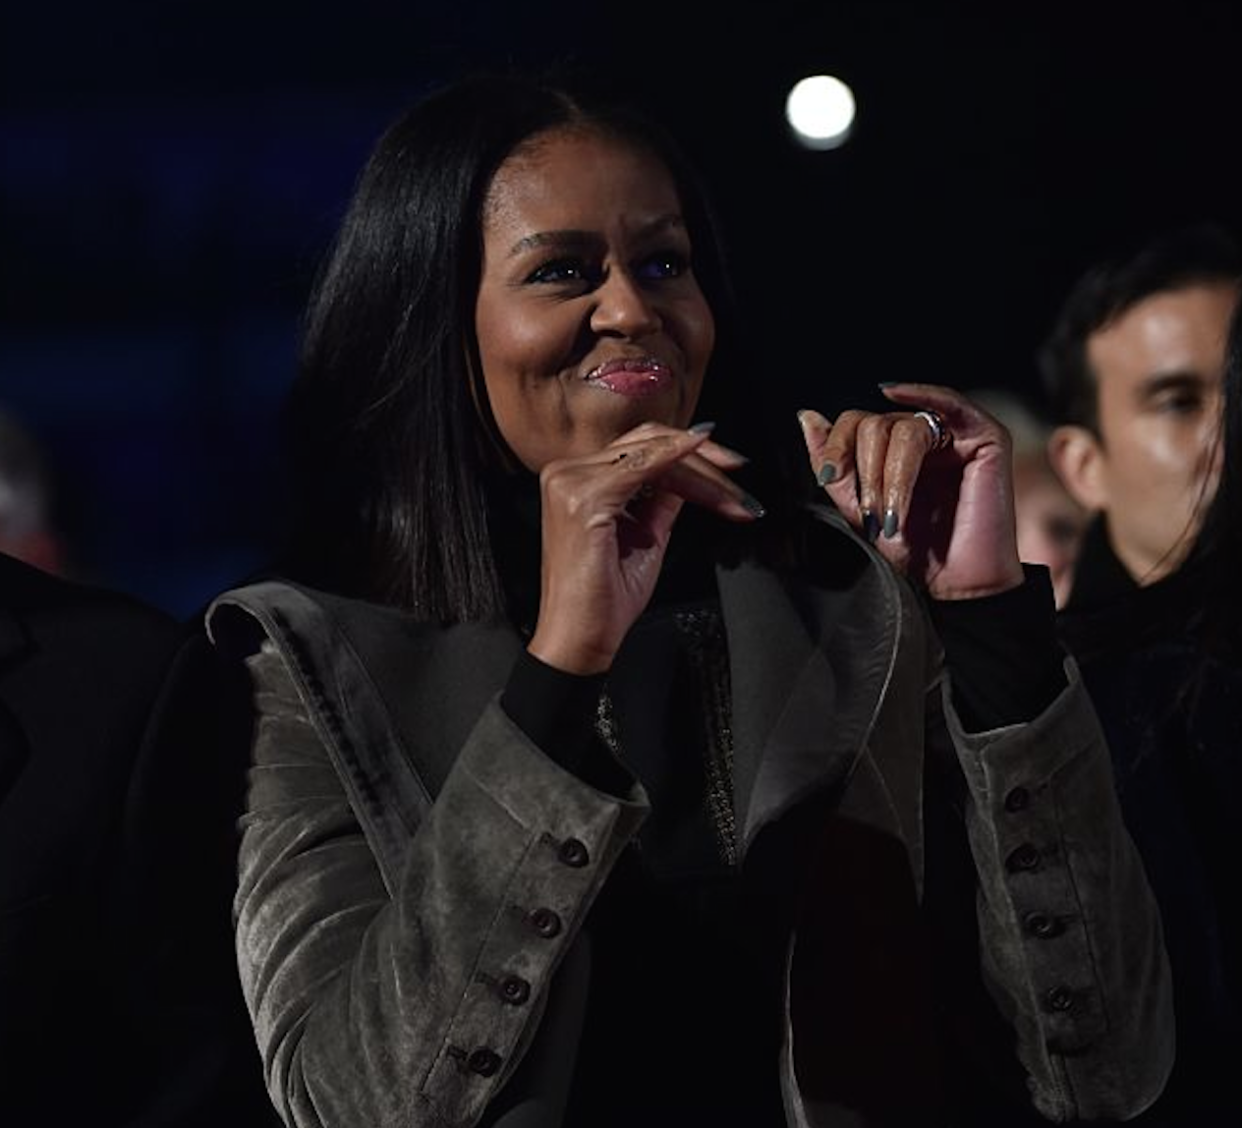 Michelle Obama looked like a shining star at her final Christmas tree lighting